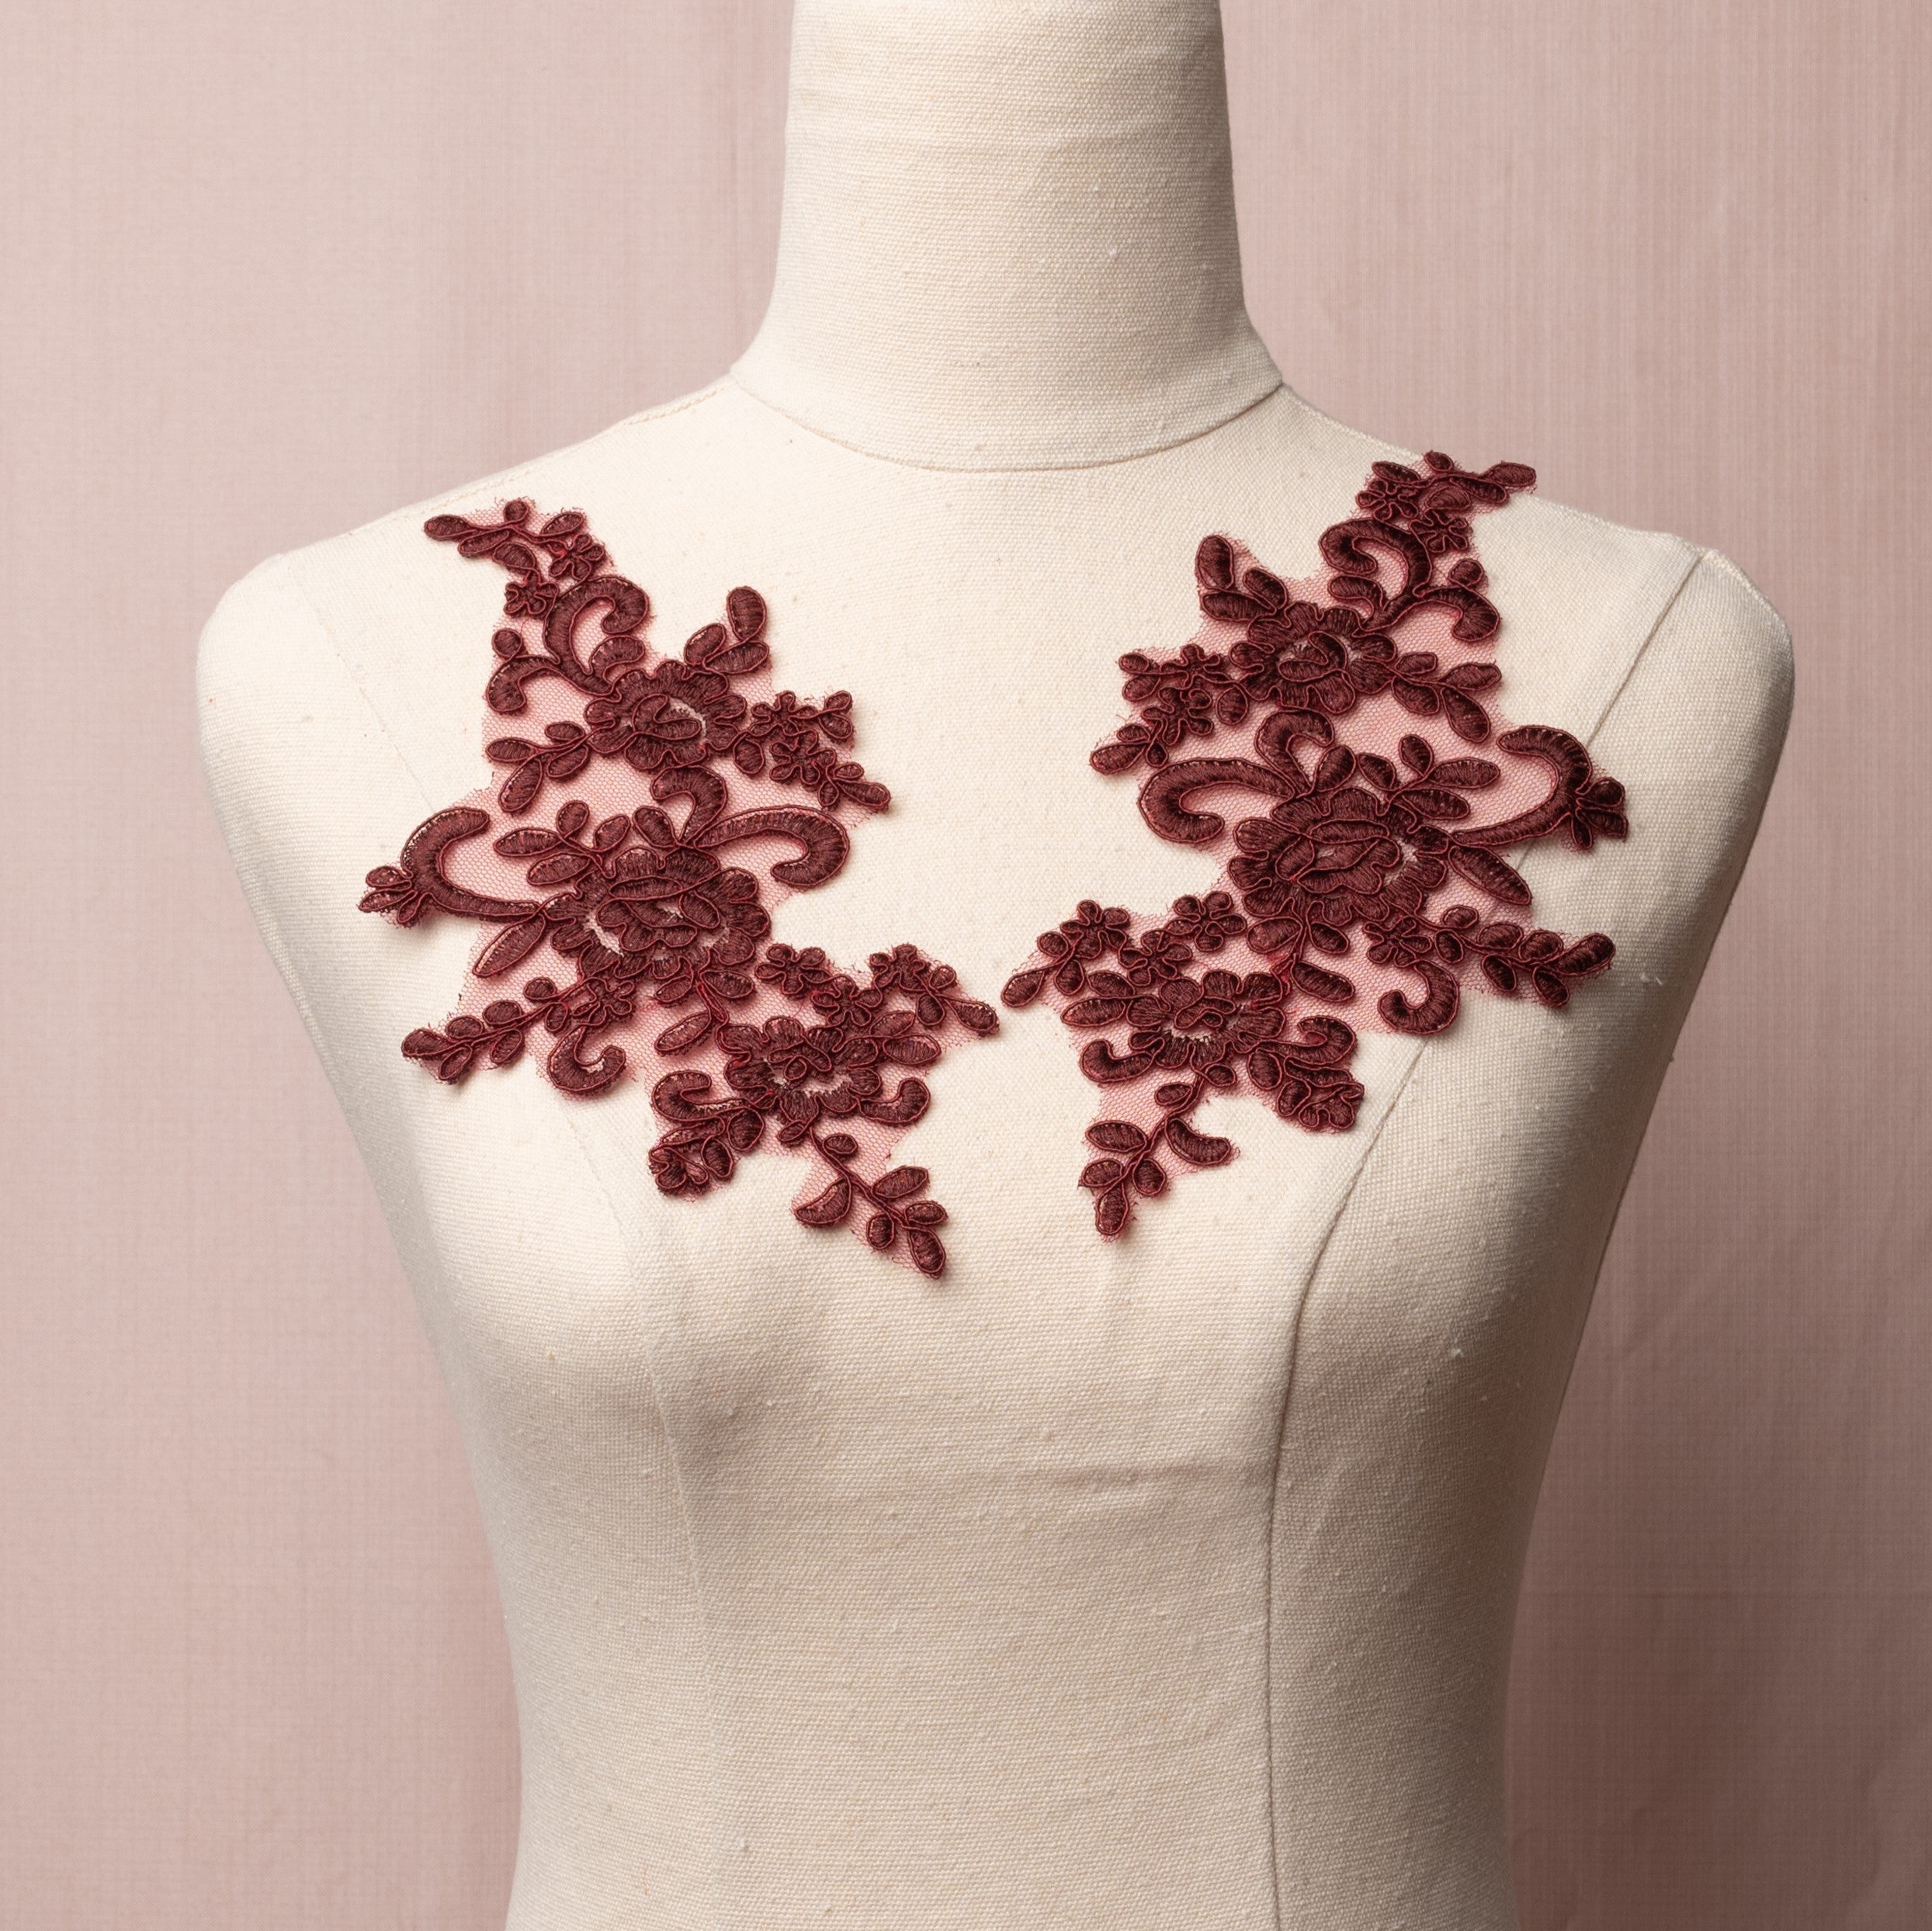 Mirrored pair of red brown corded floral appliques embroidered onto a fine net and displayed on a mannequin.